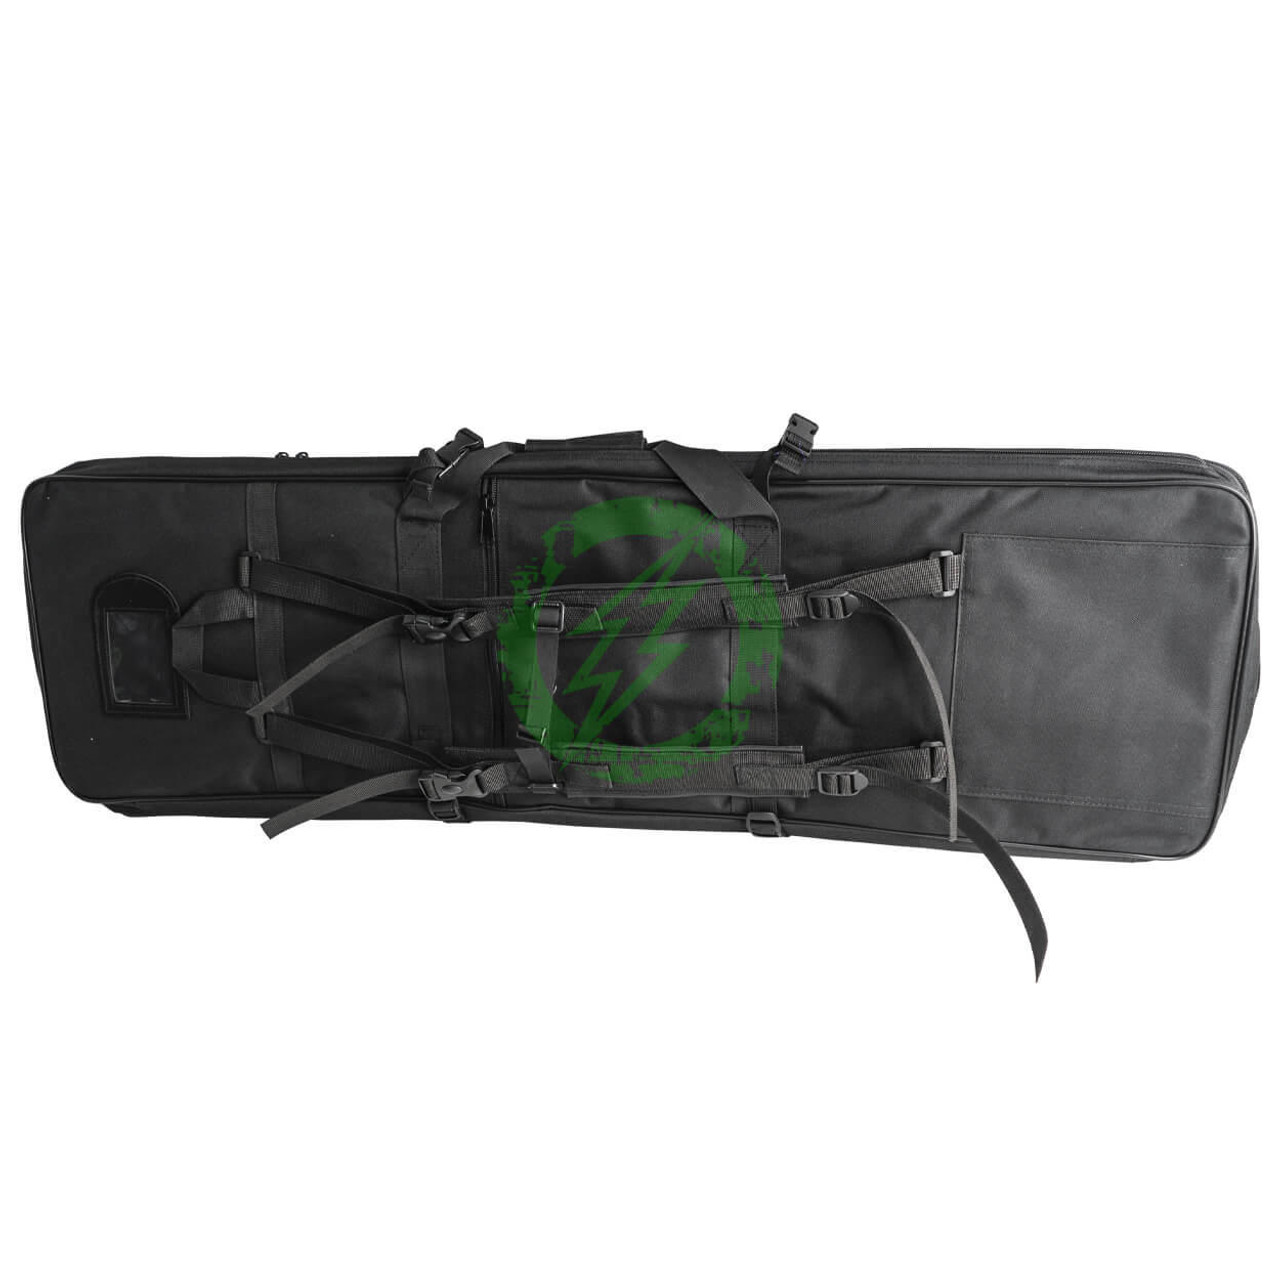  High Power Airsoft HPA Rifle Bag with Mag Pouches & Pockets 